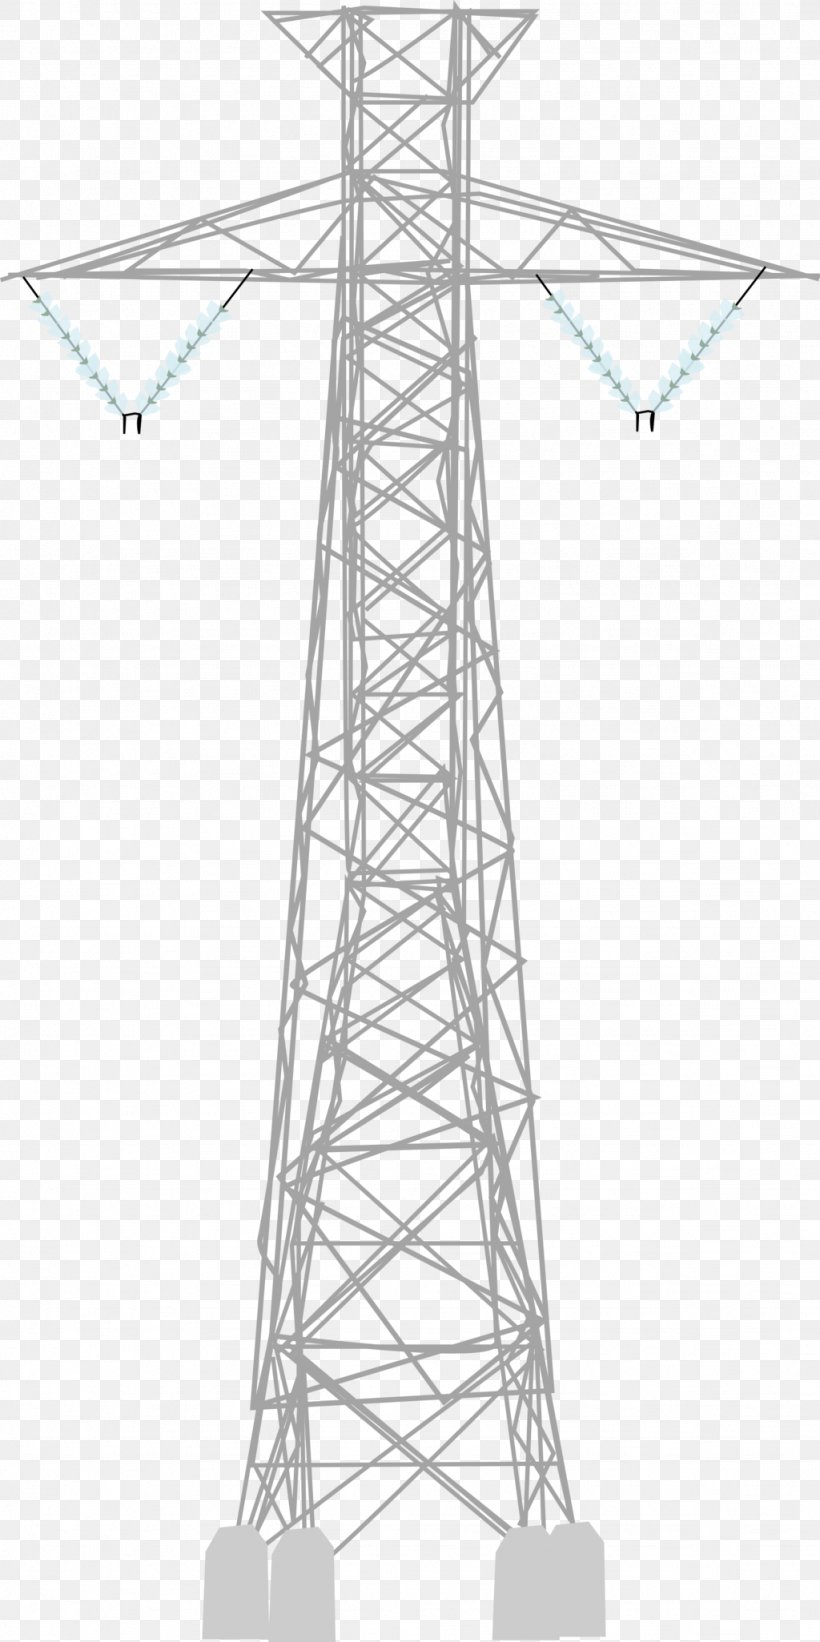 Electricity Overhead Power Line Transmission Tower Public Utility, PNG, 1024x2051px, Electricity, Electric Power, Electric Power Transmission, Electrical Supply, Energy Download Free